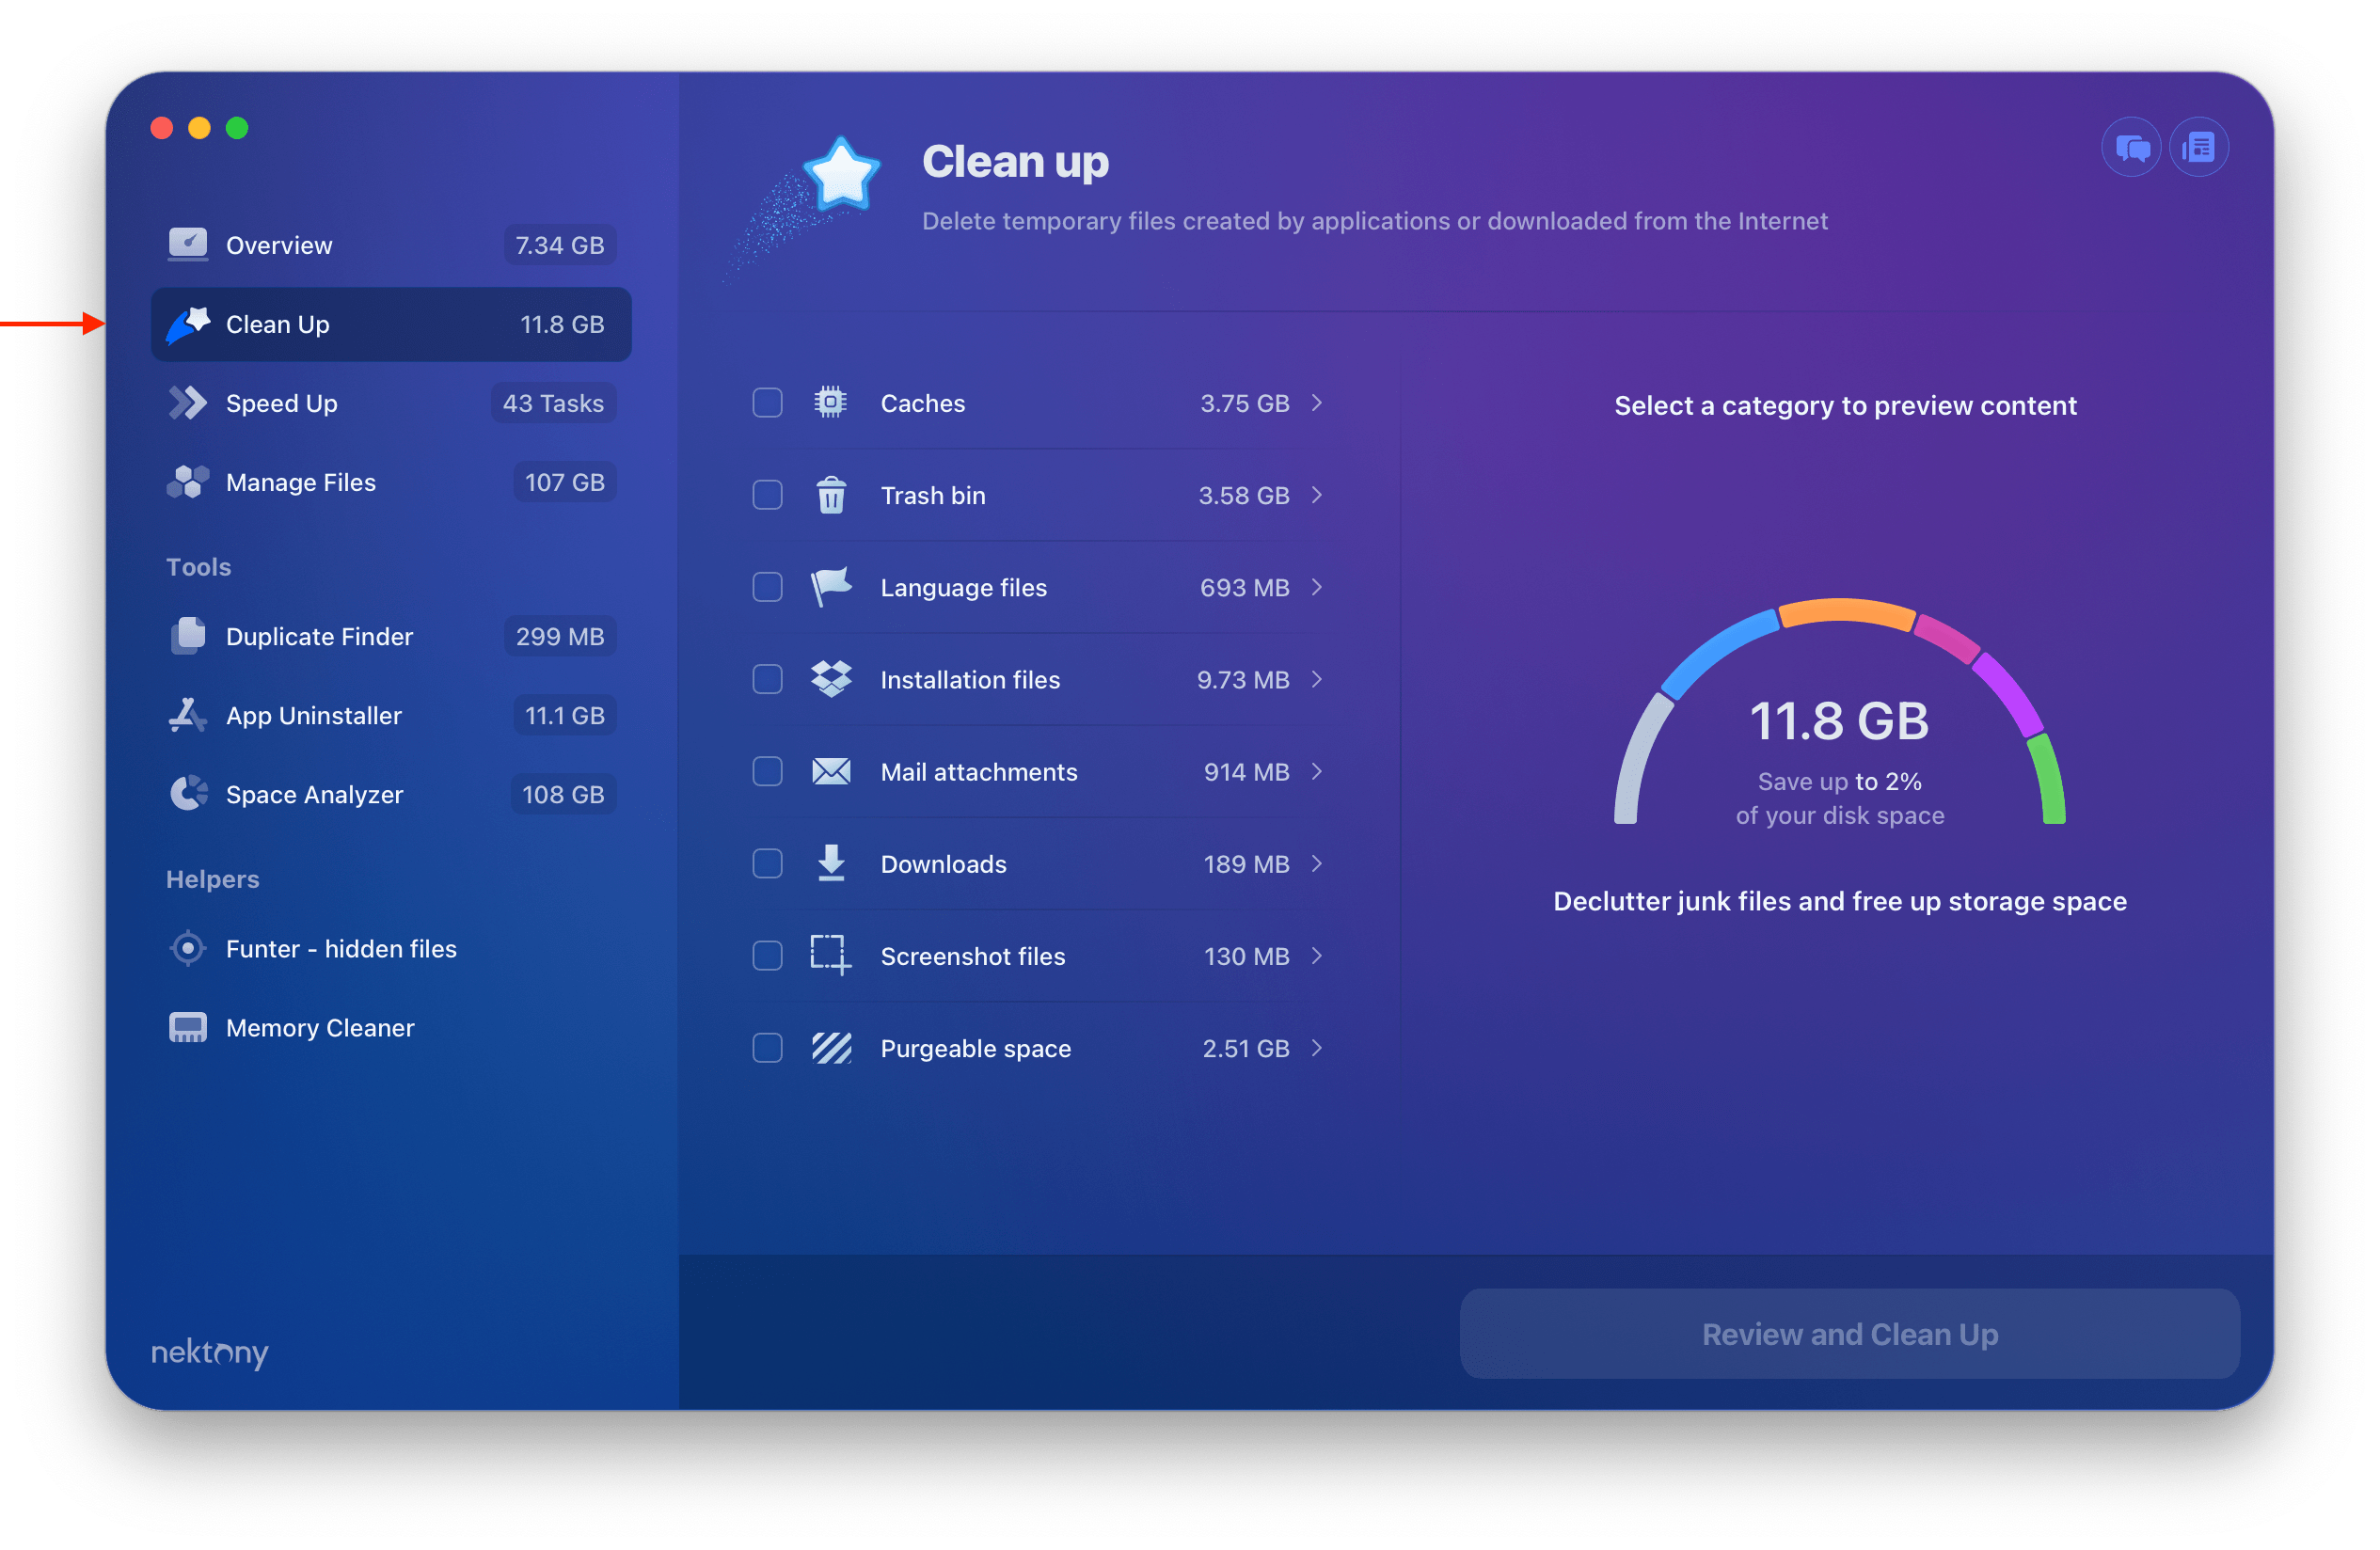 MacCleaner Pro window showing how the app works